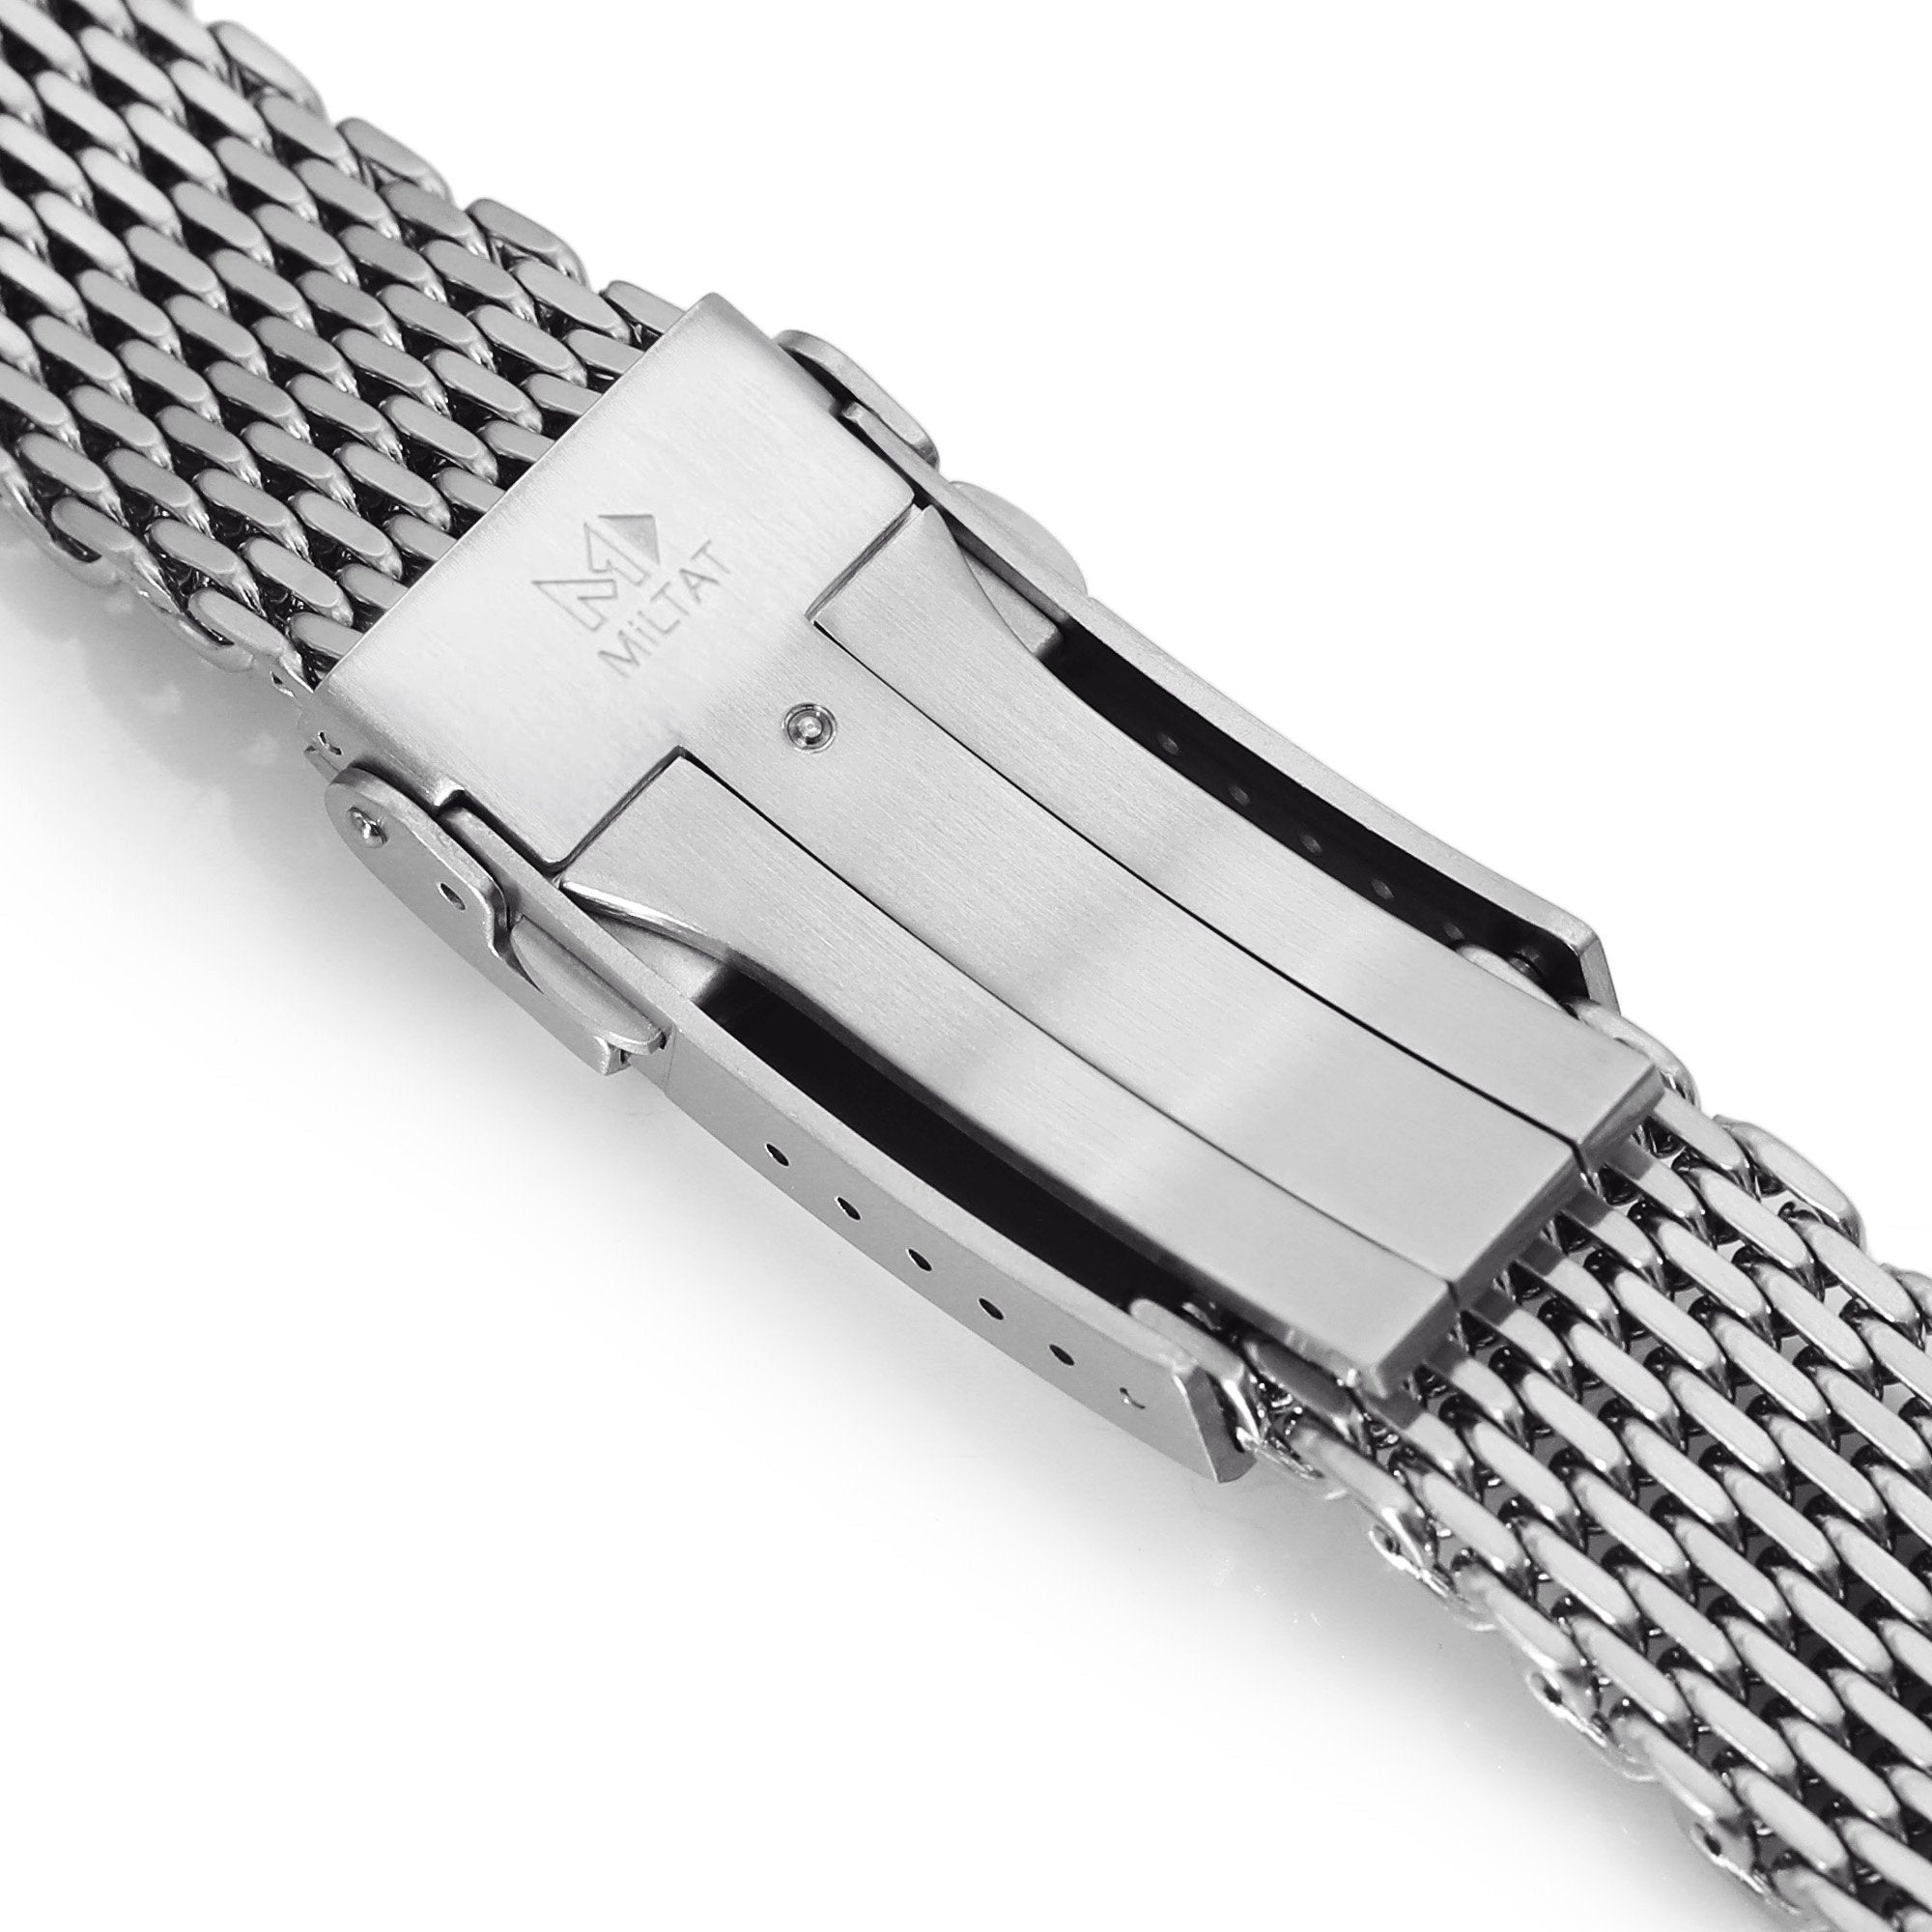 20mm Tapered "SHARK" Mesh Band Stainless Steel Watch Bracelet, V-Clasp, Brushed